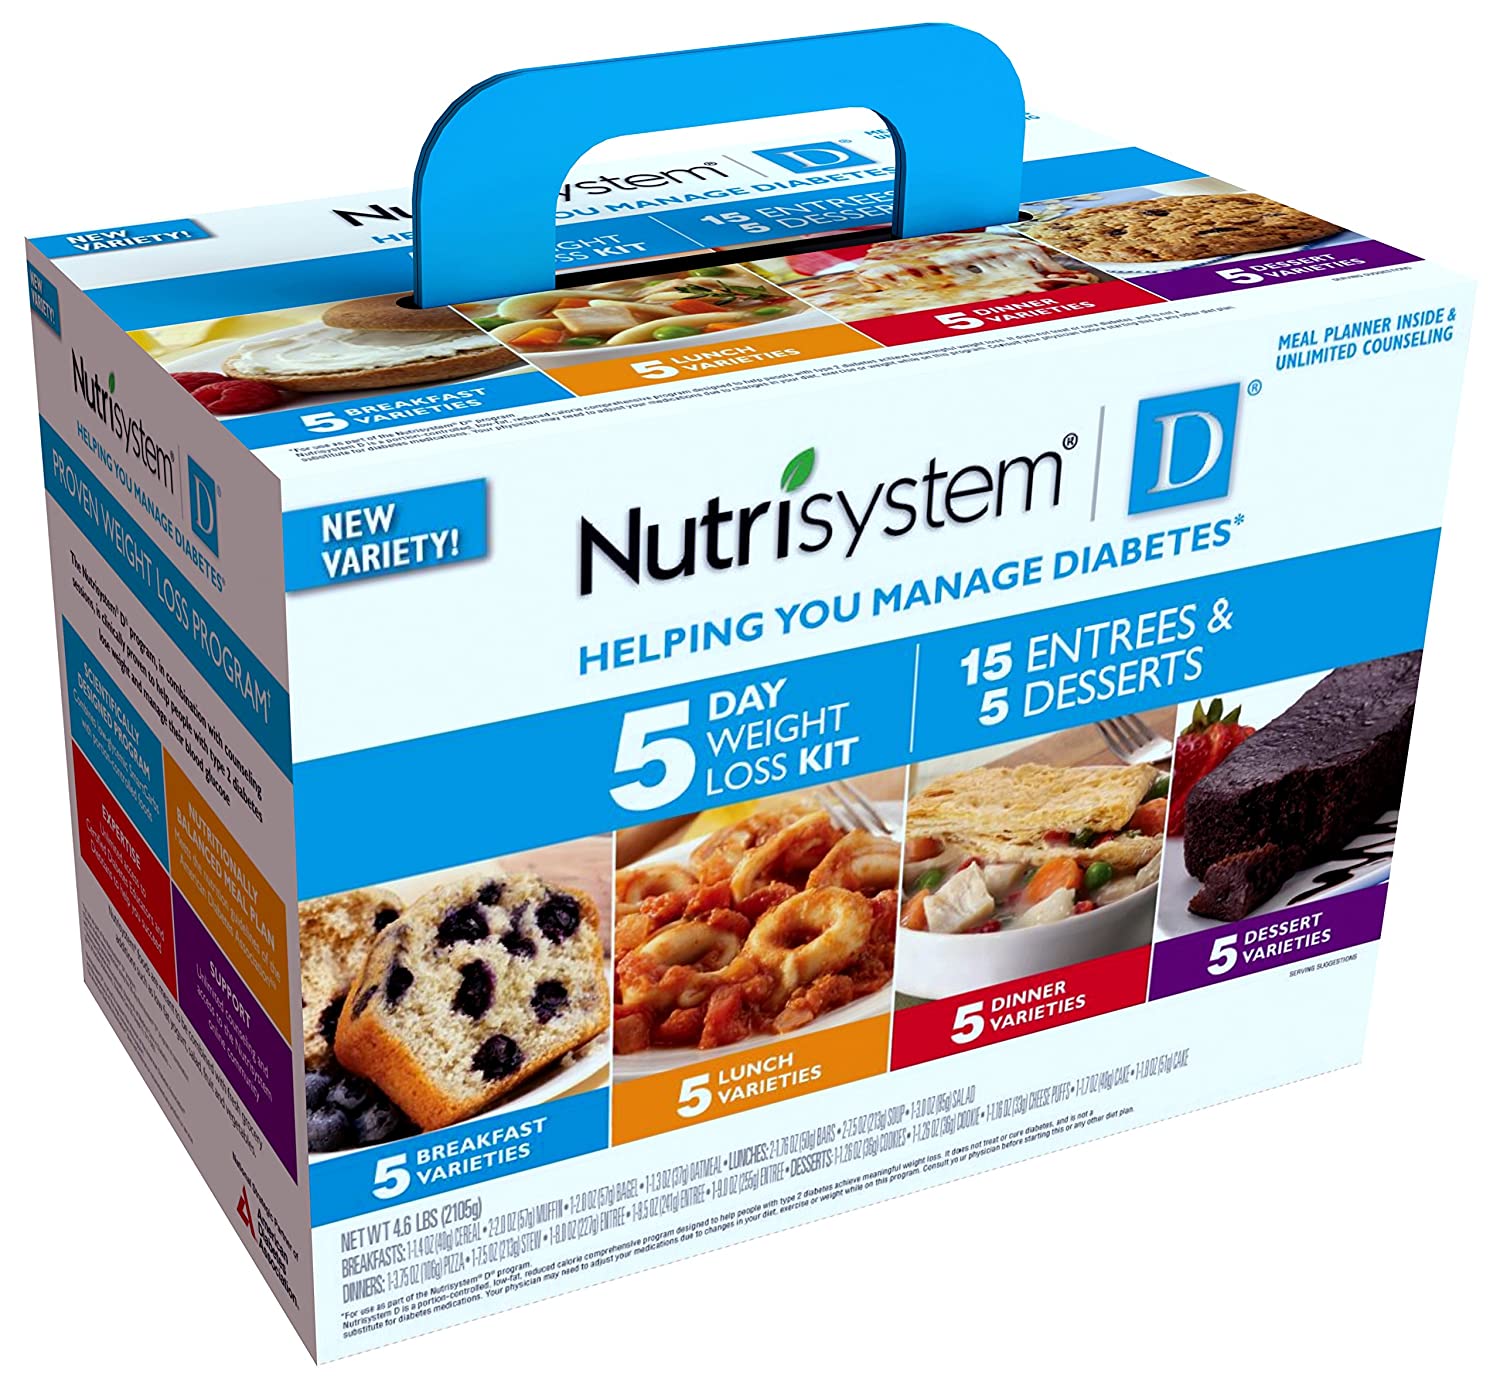 Nutrisystem 5 Day Diabetic Weight Loss Kit